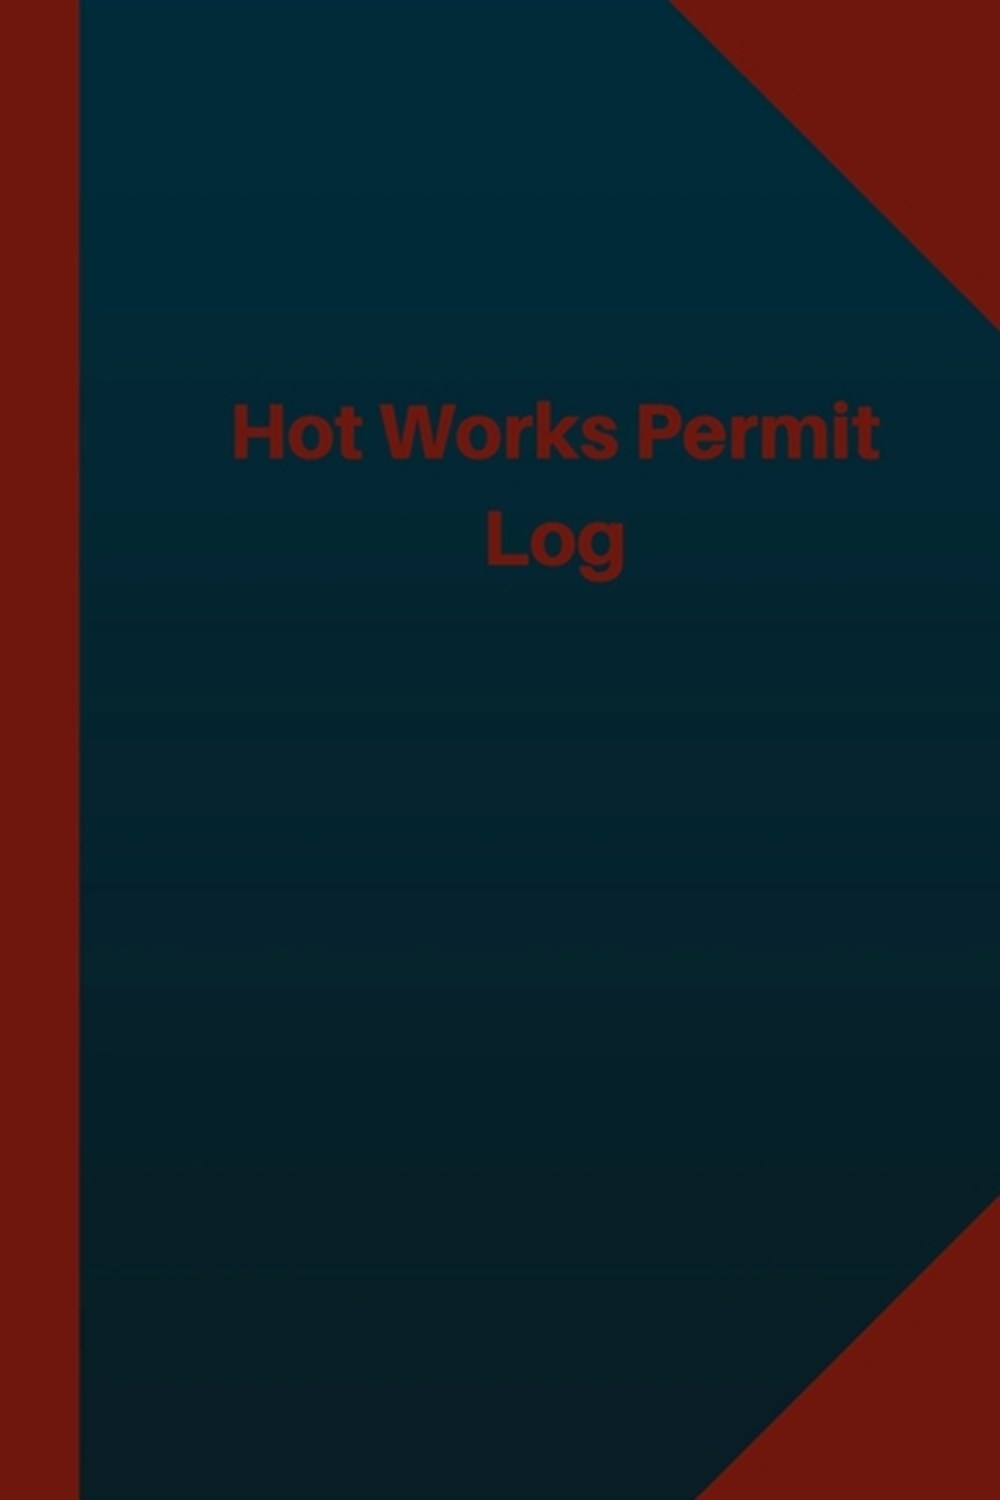 Hot Works Permit Log (Logbook, Journal - 124 pages 6x9 inches) Hot Works Permit Logbook (Blue Cover,